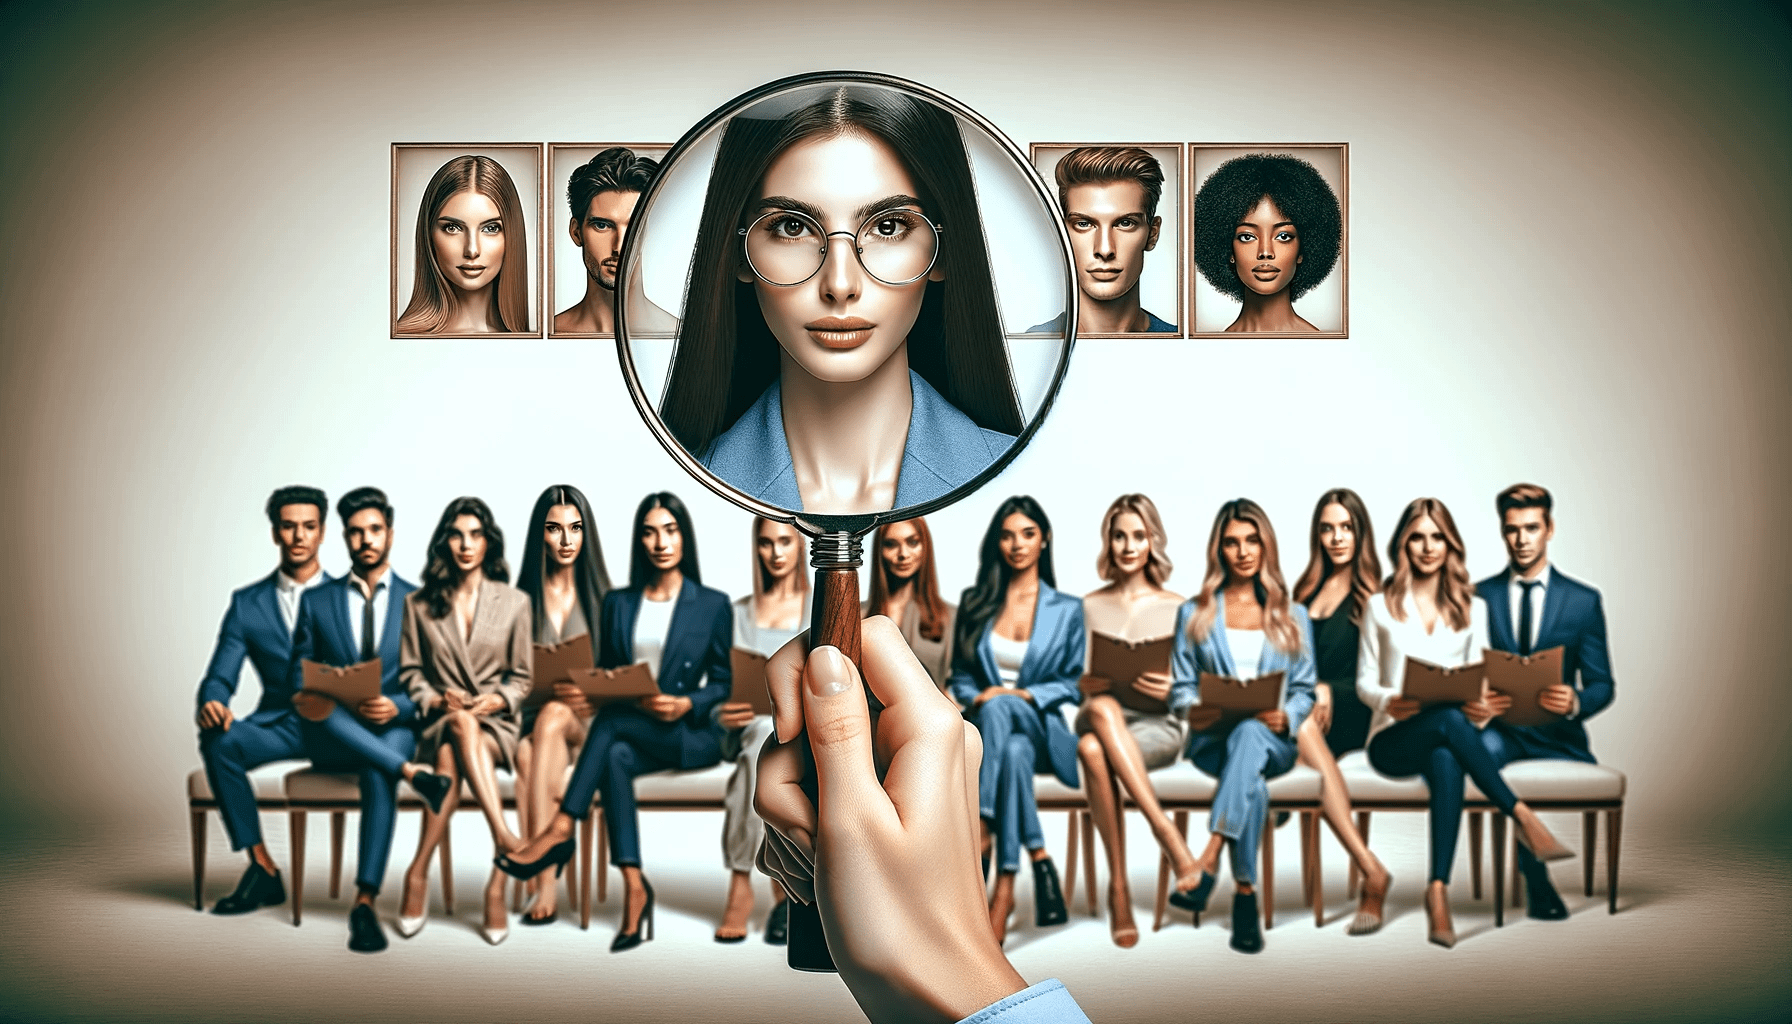 A line of diverse skinfluencers with a magnifying glass focusing on one, symbolizing the search for the ideal skincare influencer.